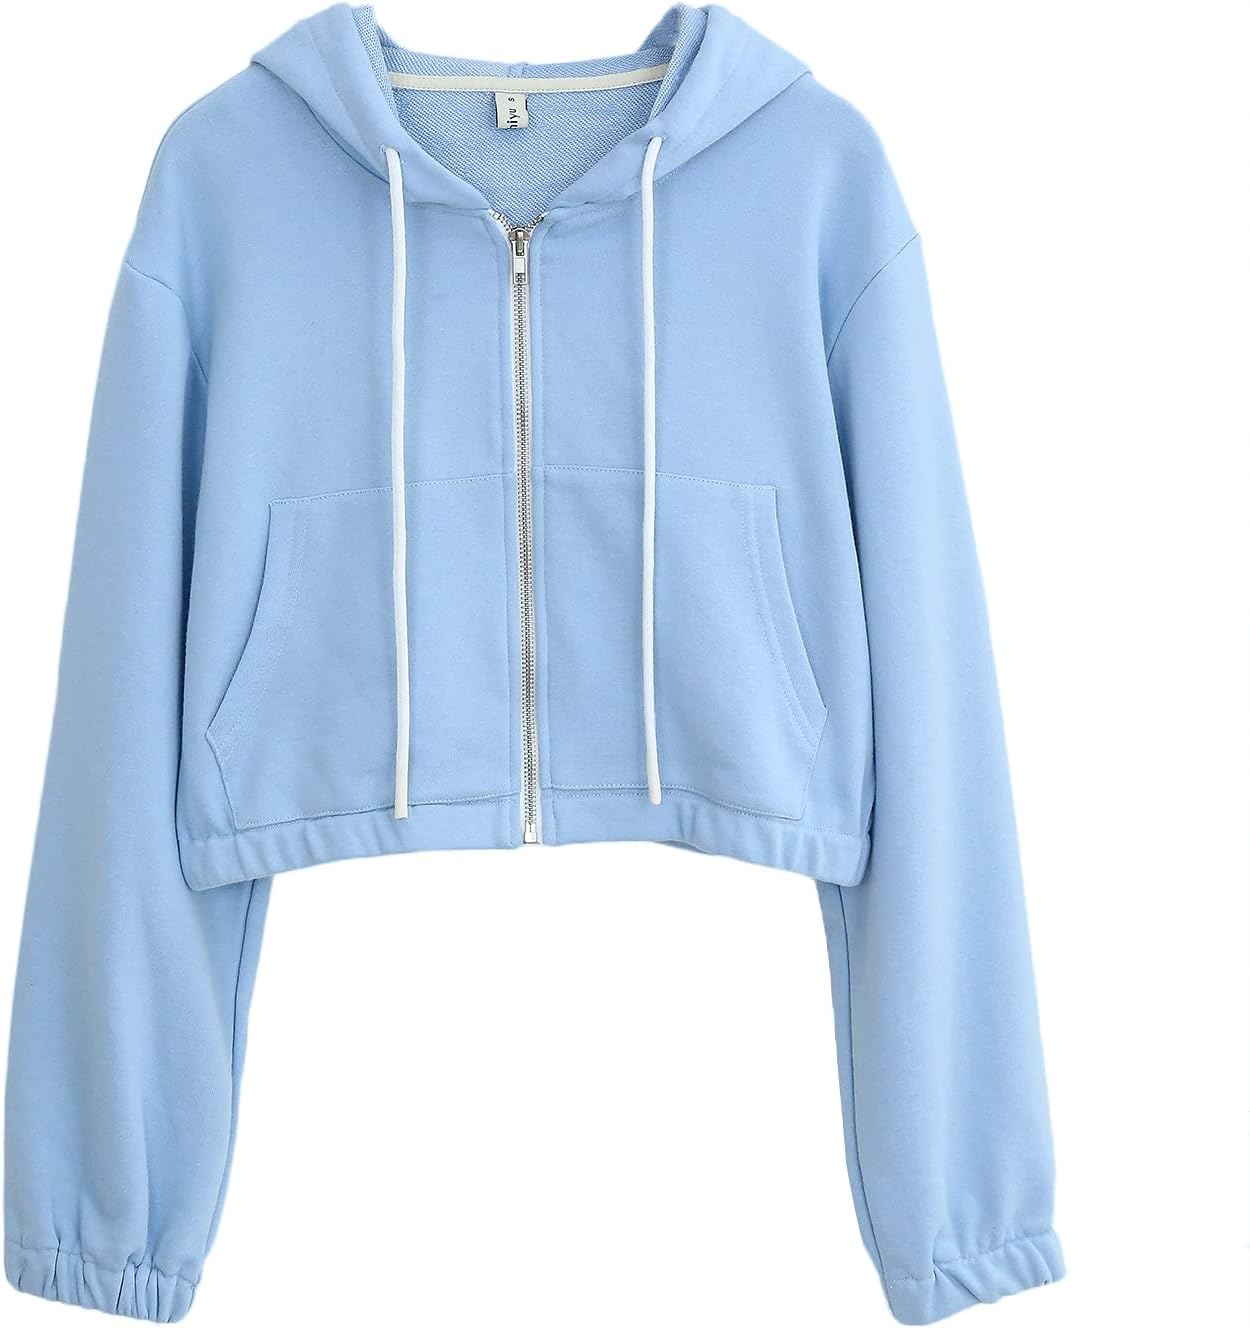 NTG Fad Blue / Small Women's Cropped Zip up Hoodie with Pockets Sweatshirt